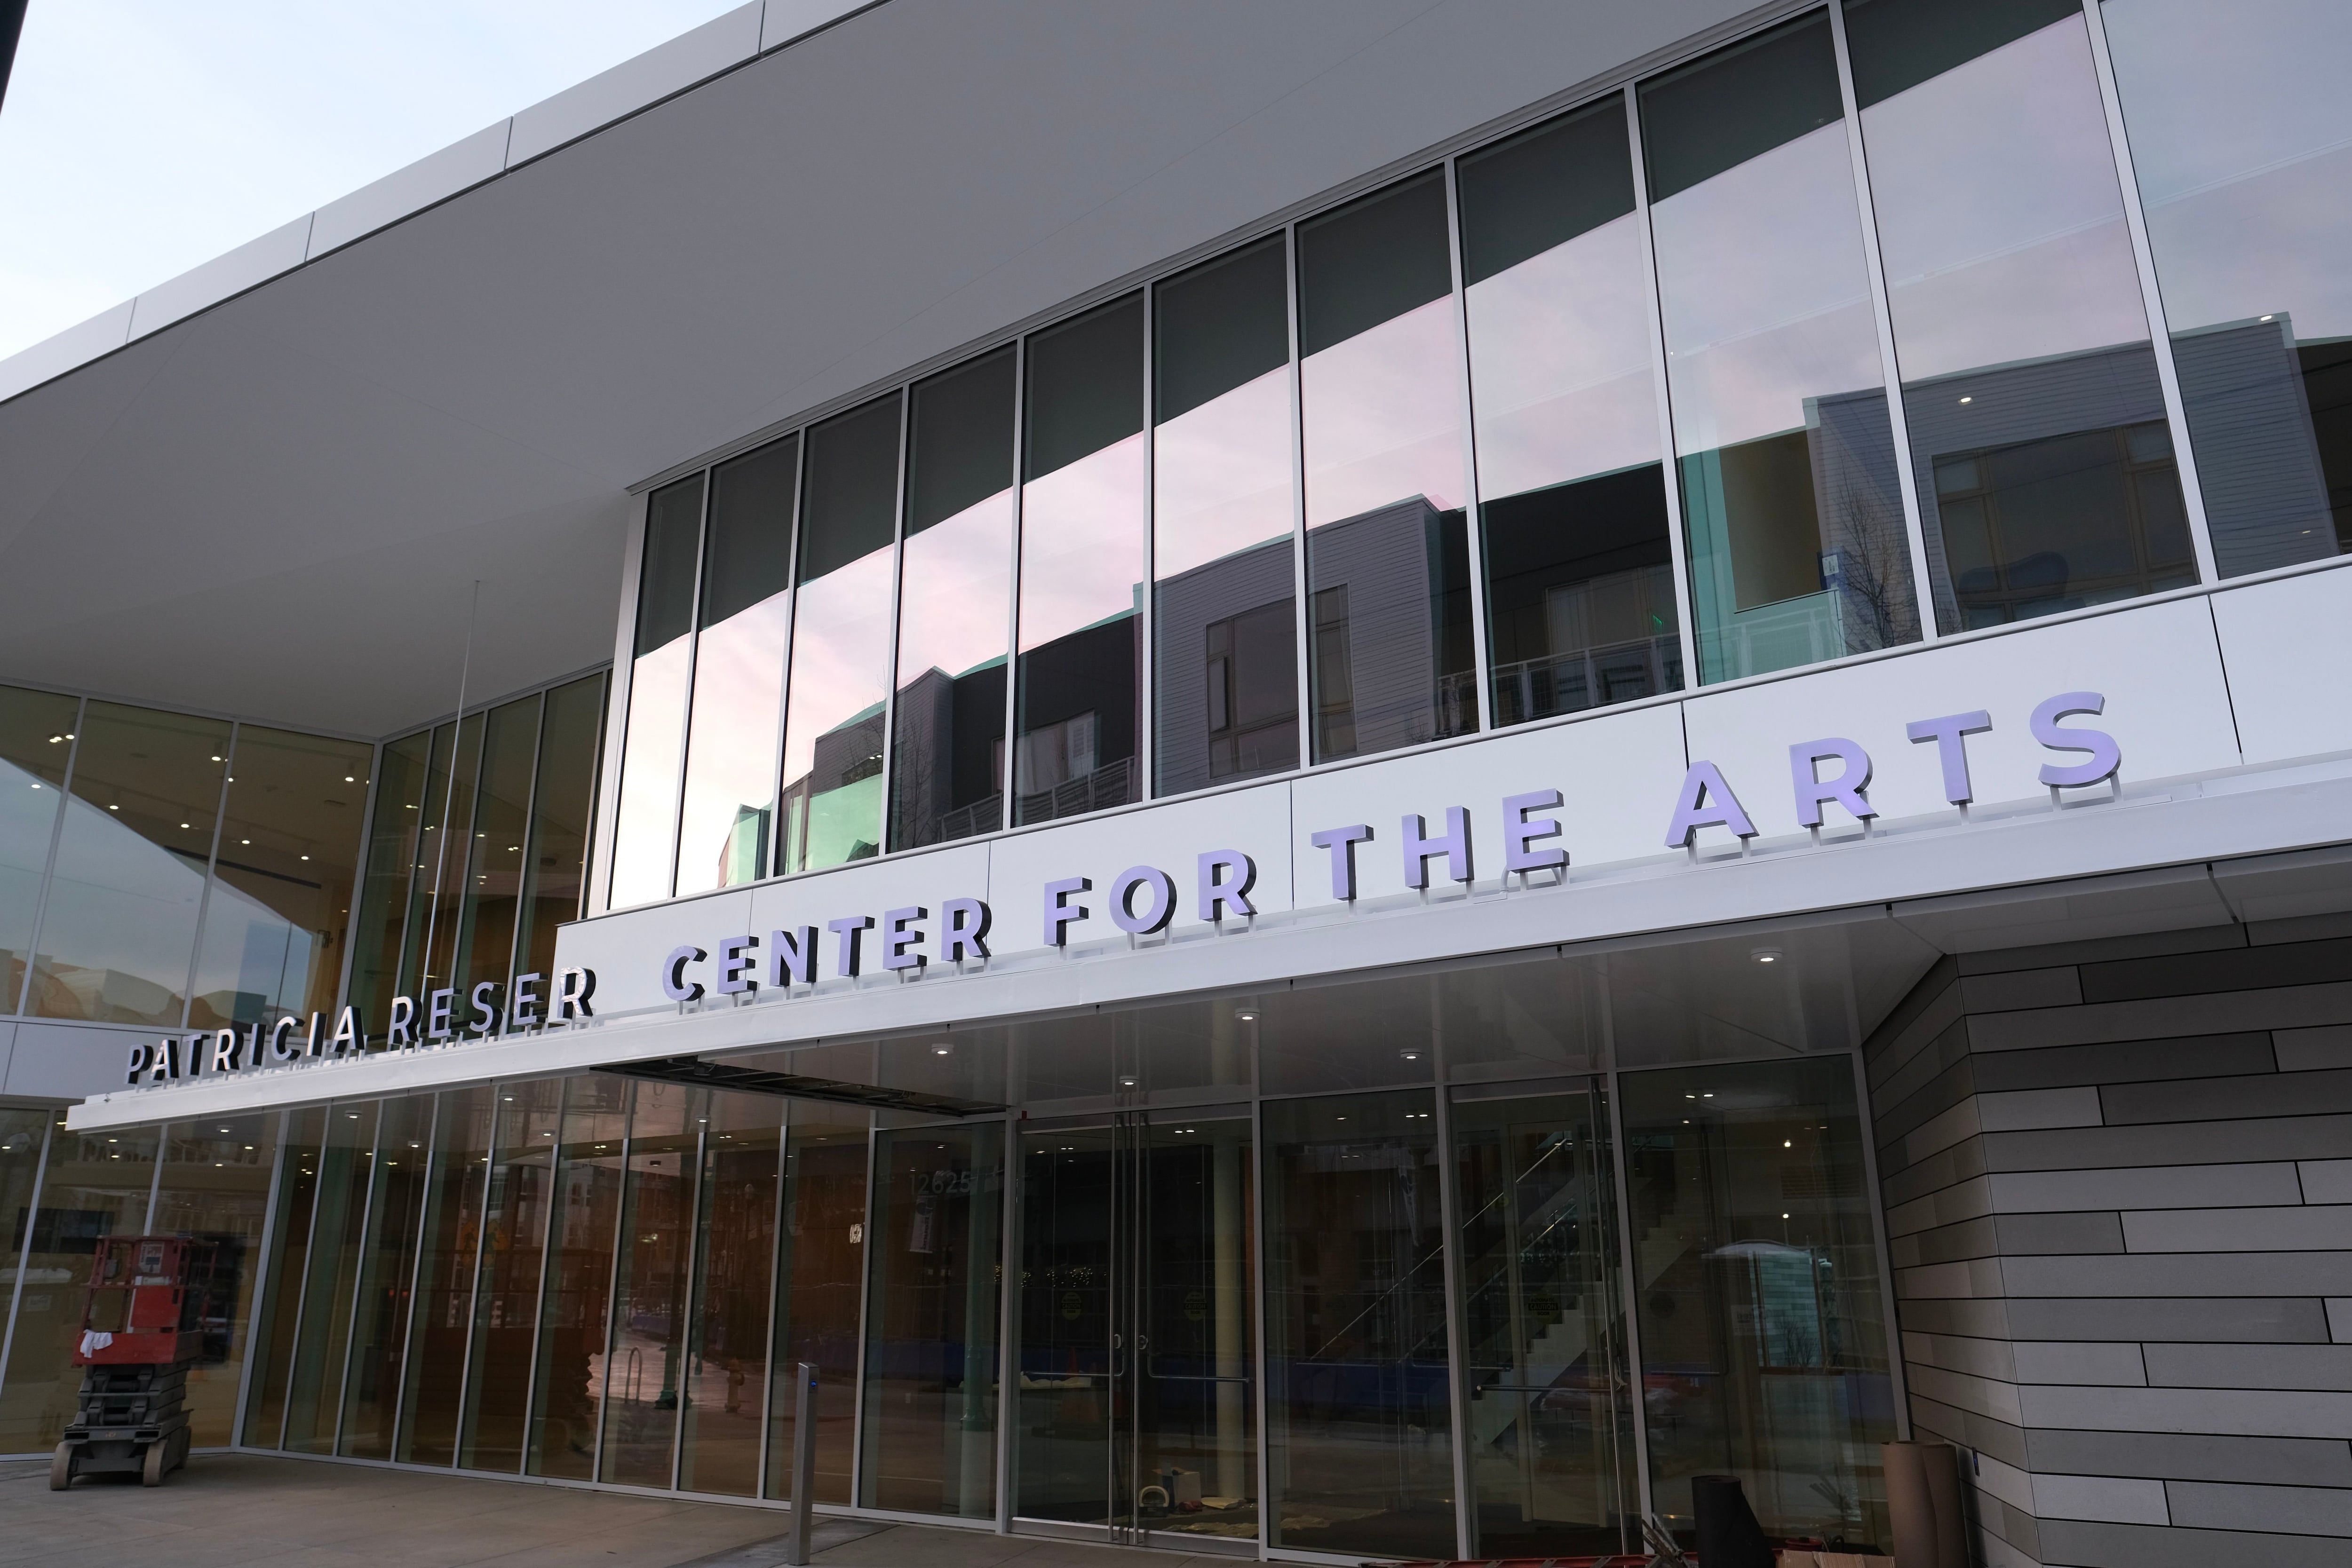 The exterior of the Patricia Reser Center for the Arts in Beaverton.